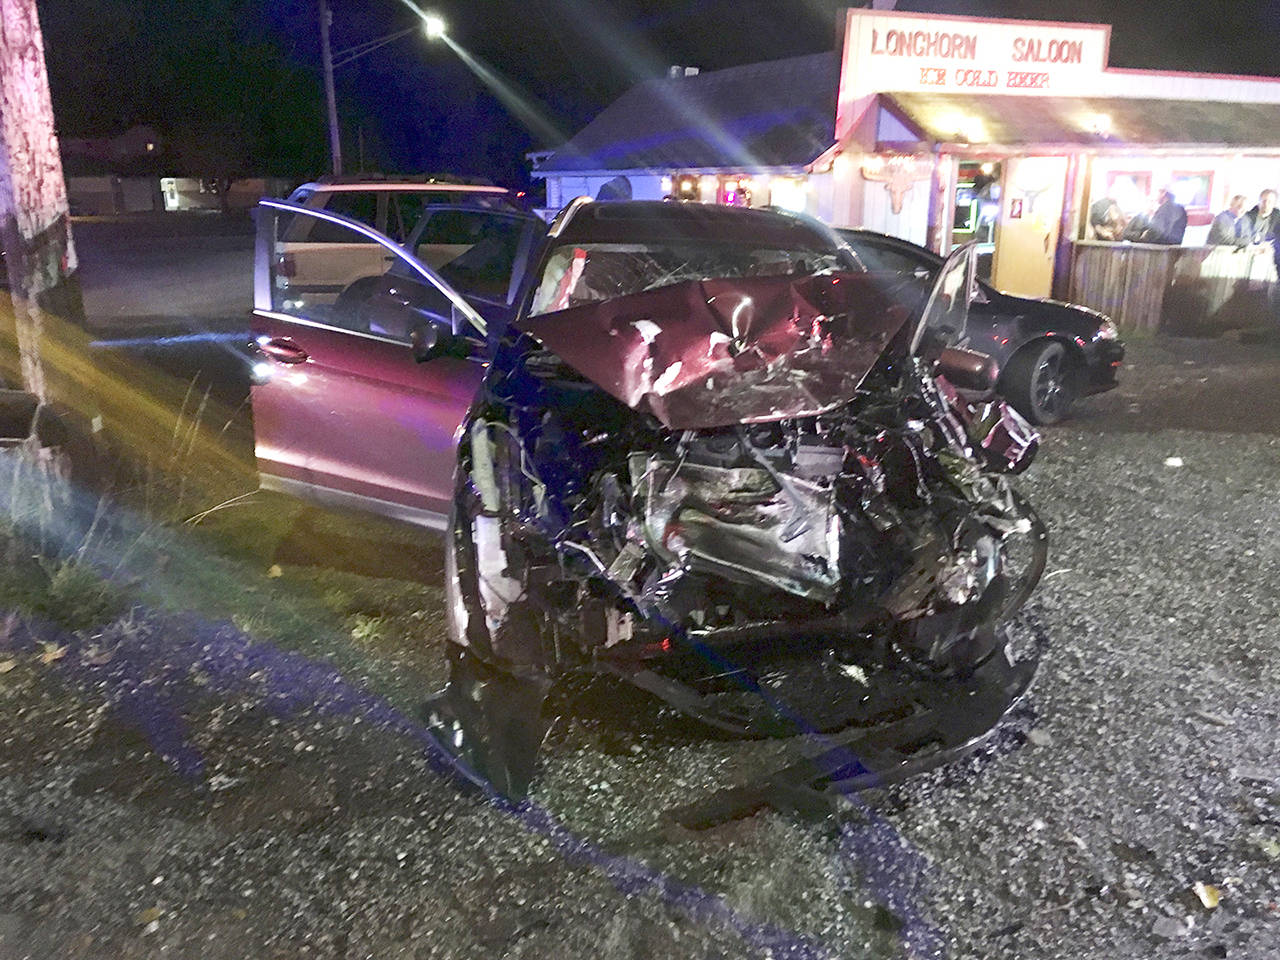 A 62-year-old woman died after a five-vehicle crash in Arlington on Wednesday night. It was reported around 5:45 p.m. at the intersection of 188th Street NE and Smokey Point Boulevard. (City of Arlington)